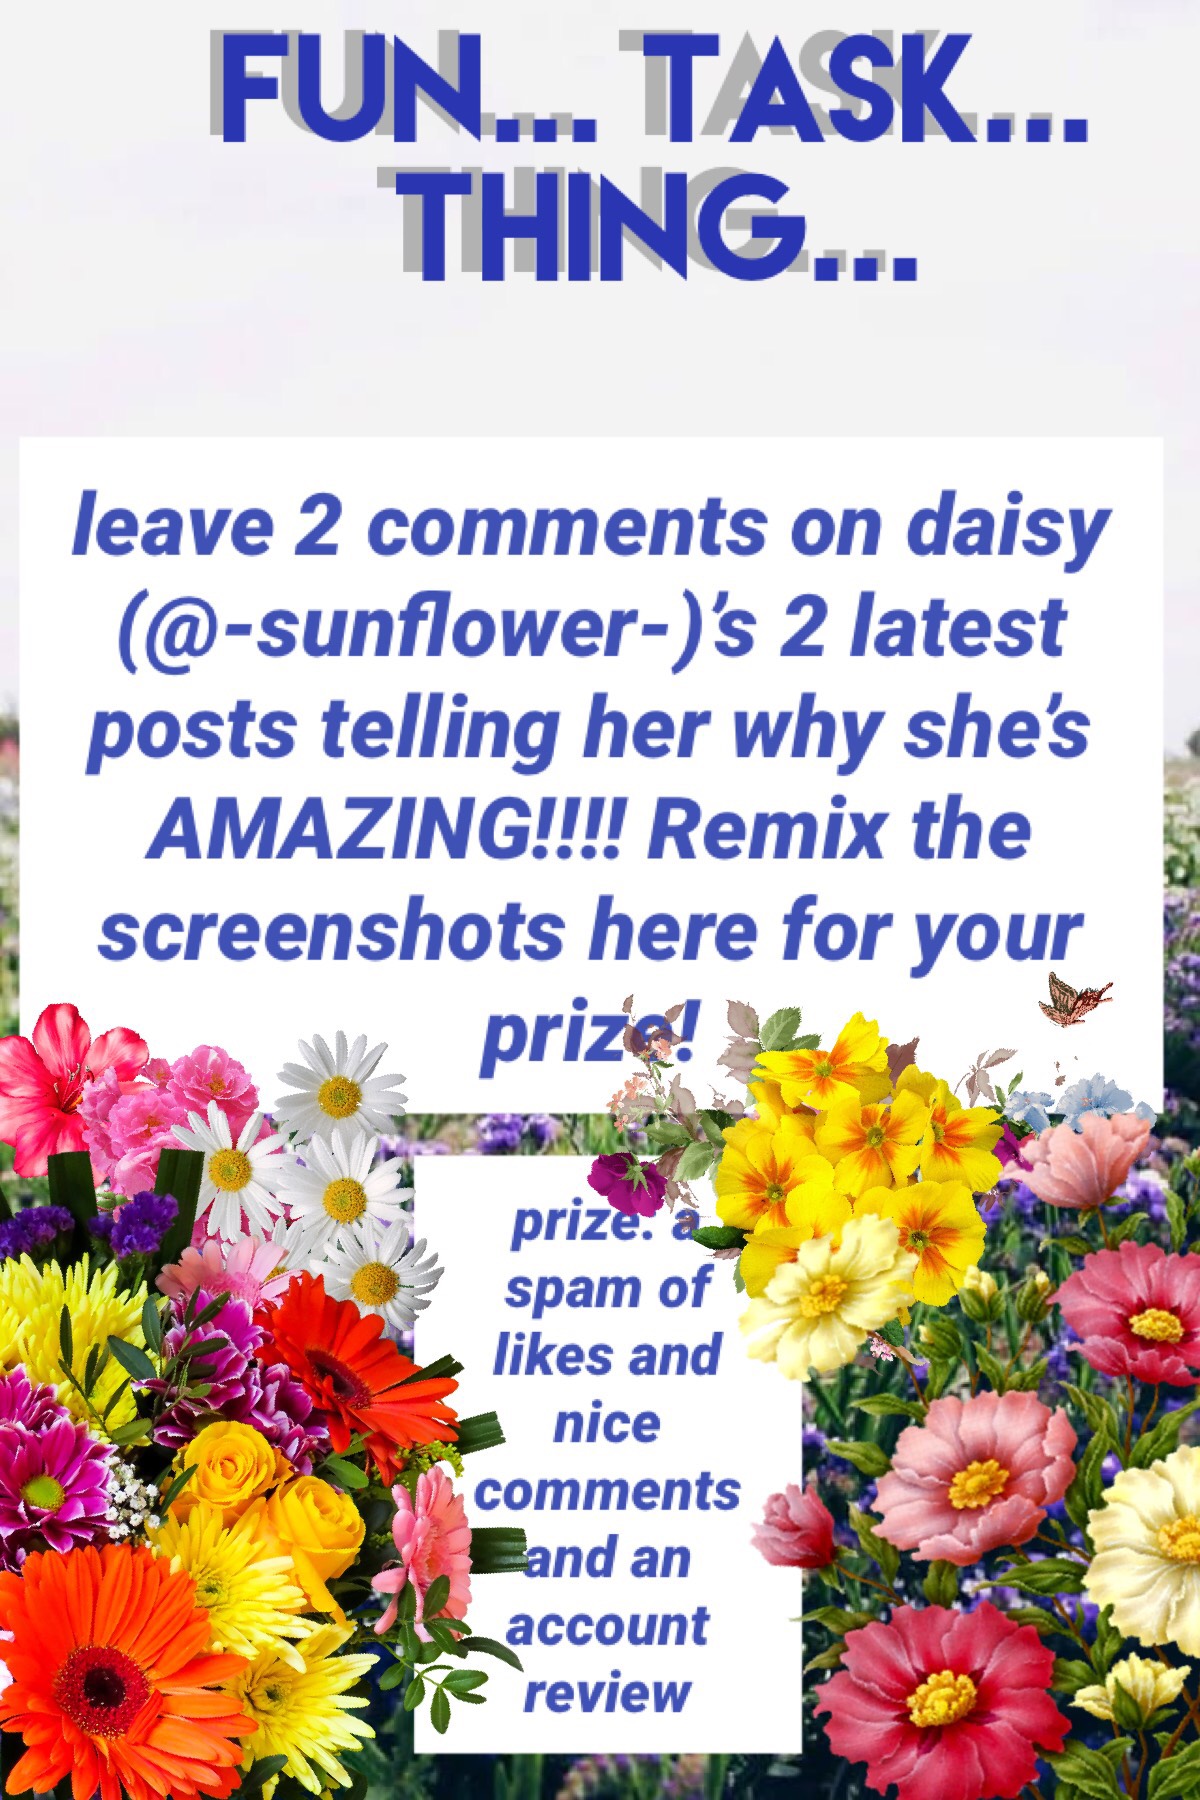 YOU 👏 ROCK 👏 DAISY 👏 (this probs leaves some clues to who I am 😉)